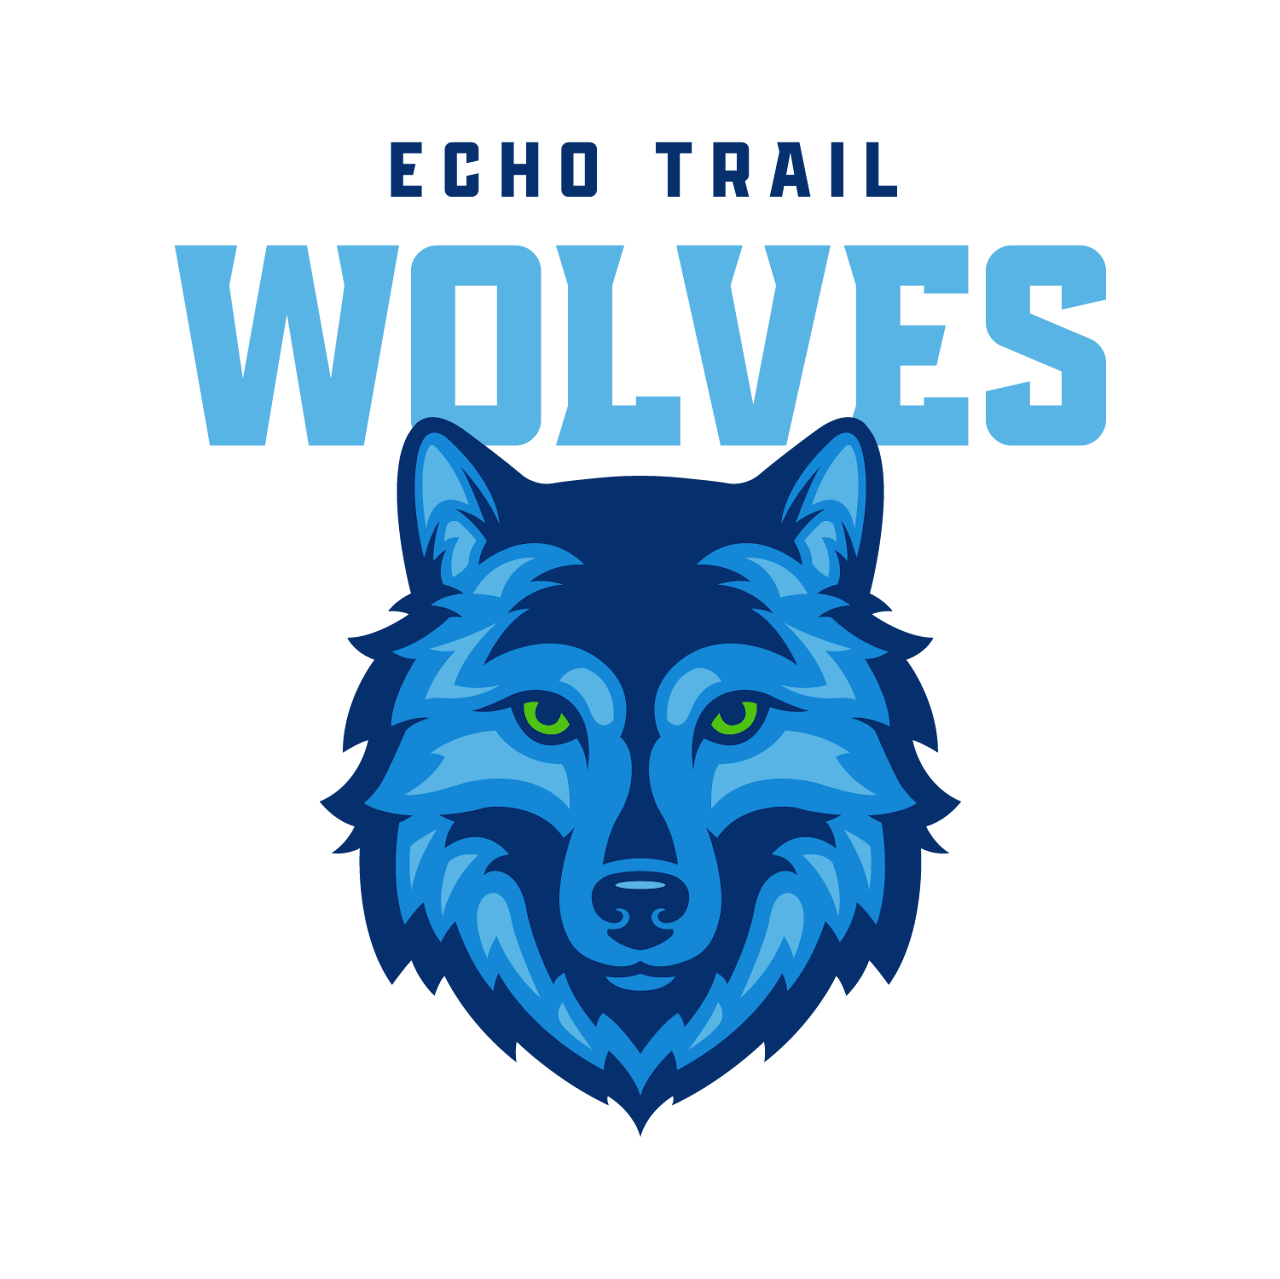 This image is a logo for the Echo Trail Wolves.